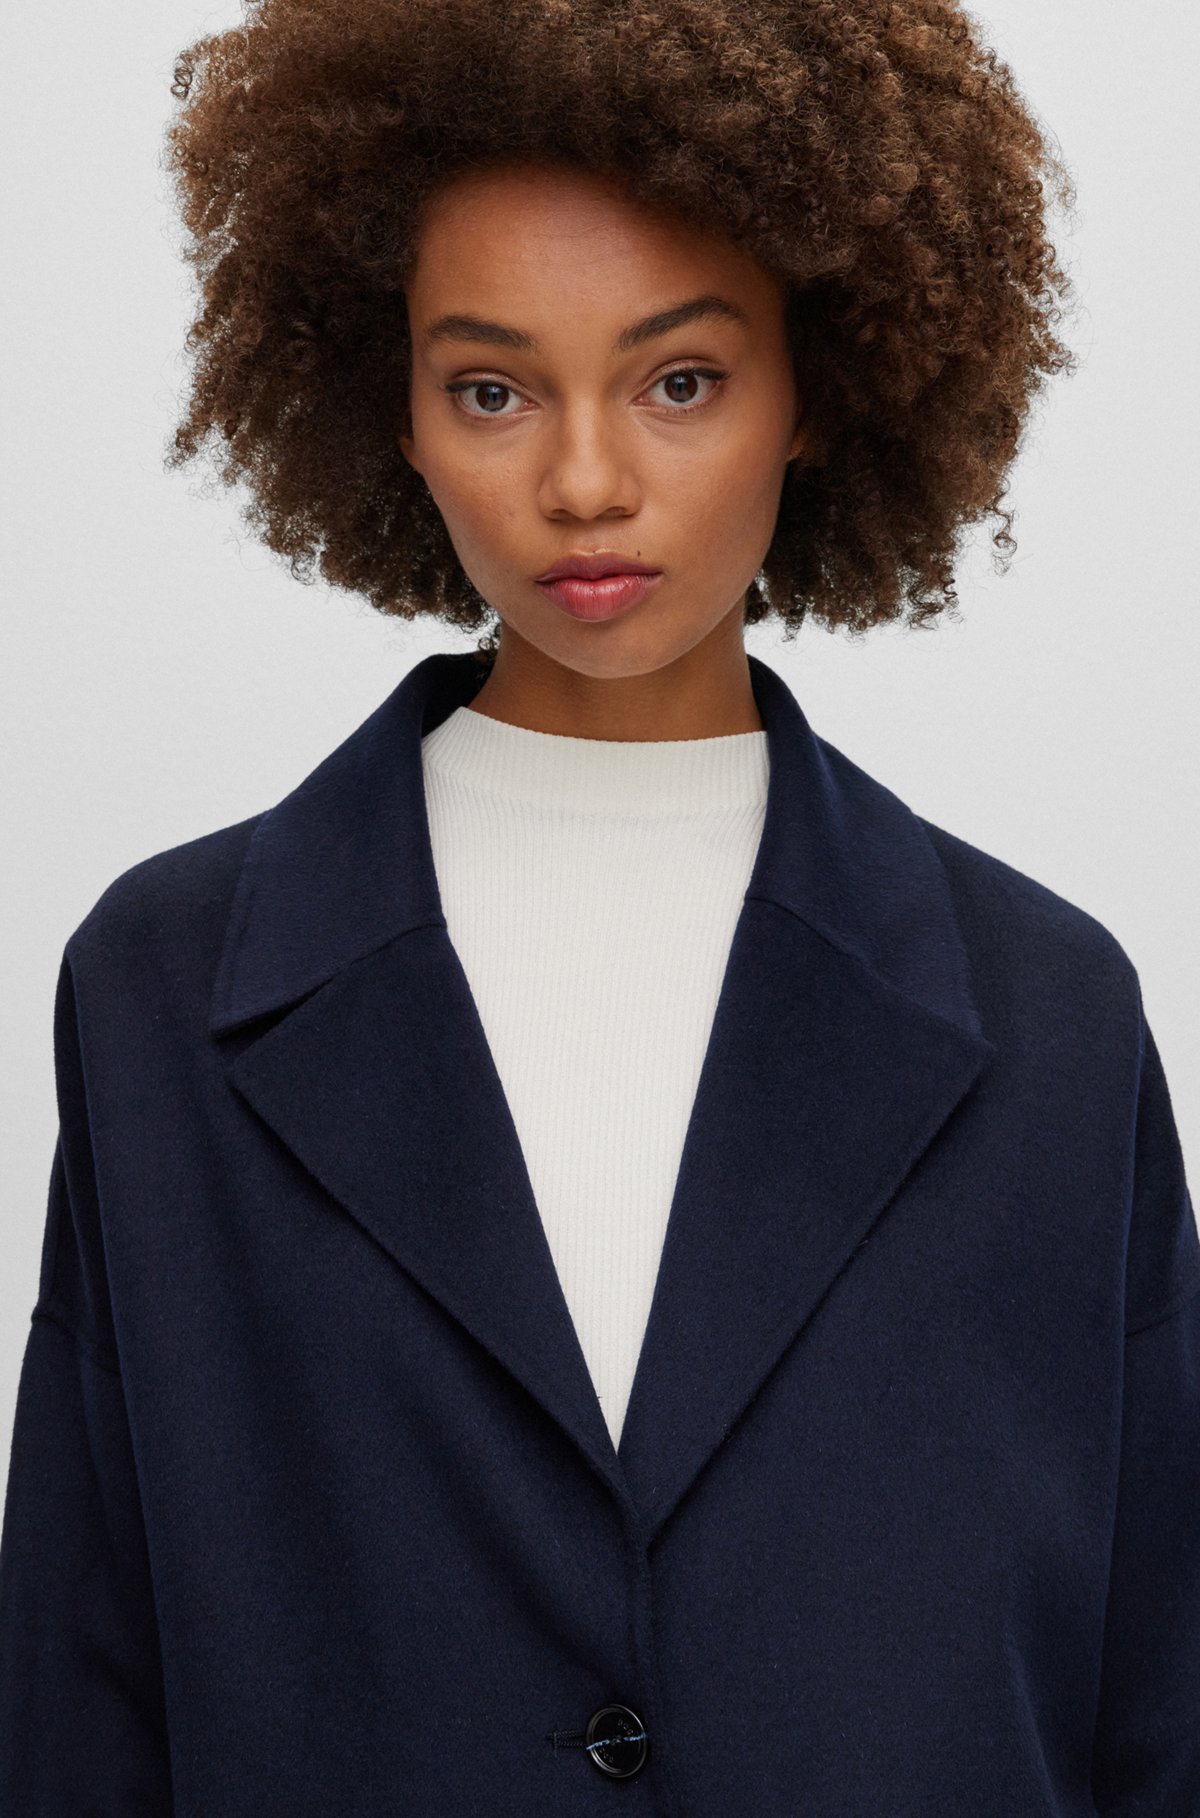 BOSS - Melange relaxed-fit coat blended with wool